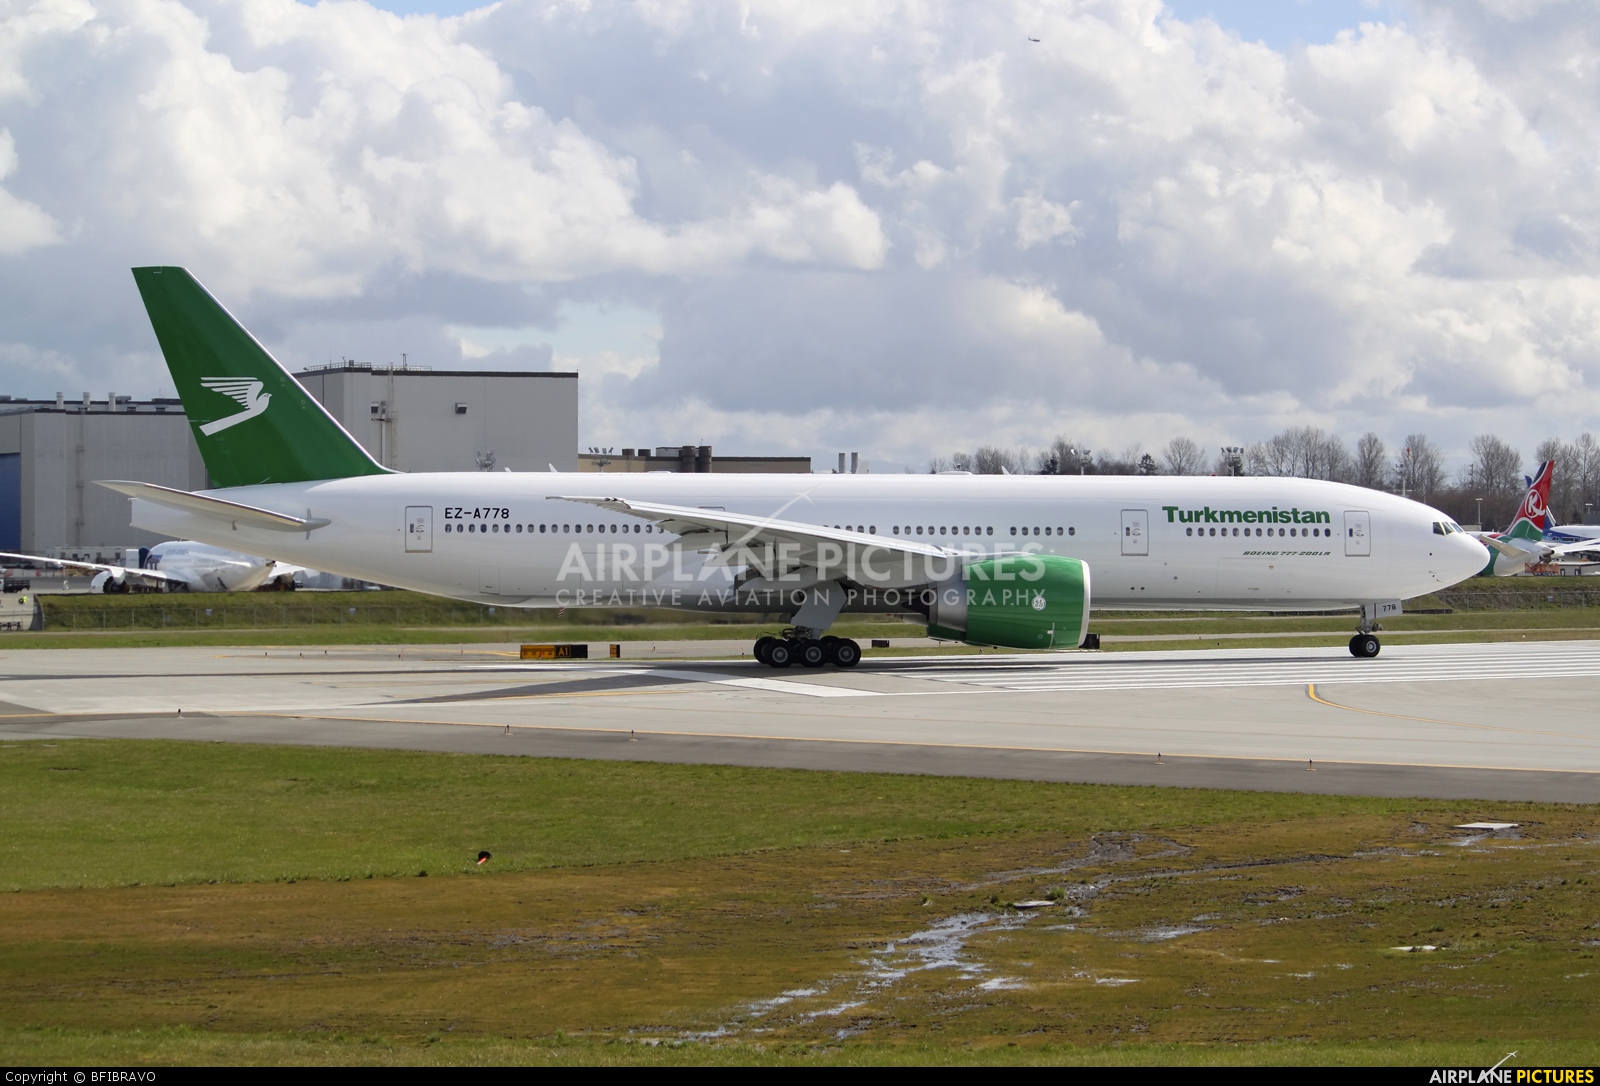 Turkmenistan Airlines EZ-A778 aircraft at Everett - Snohomish County / Paine Field